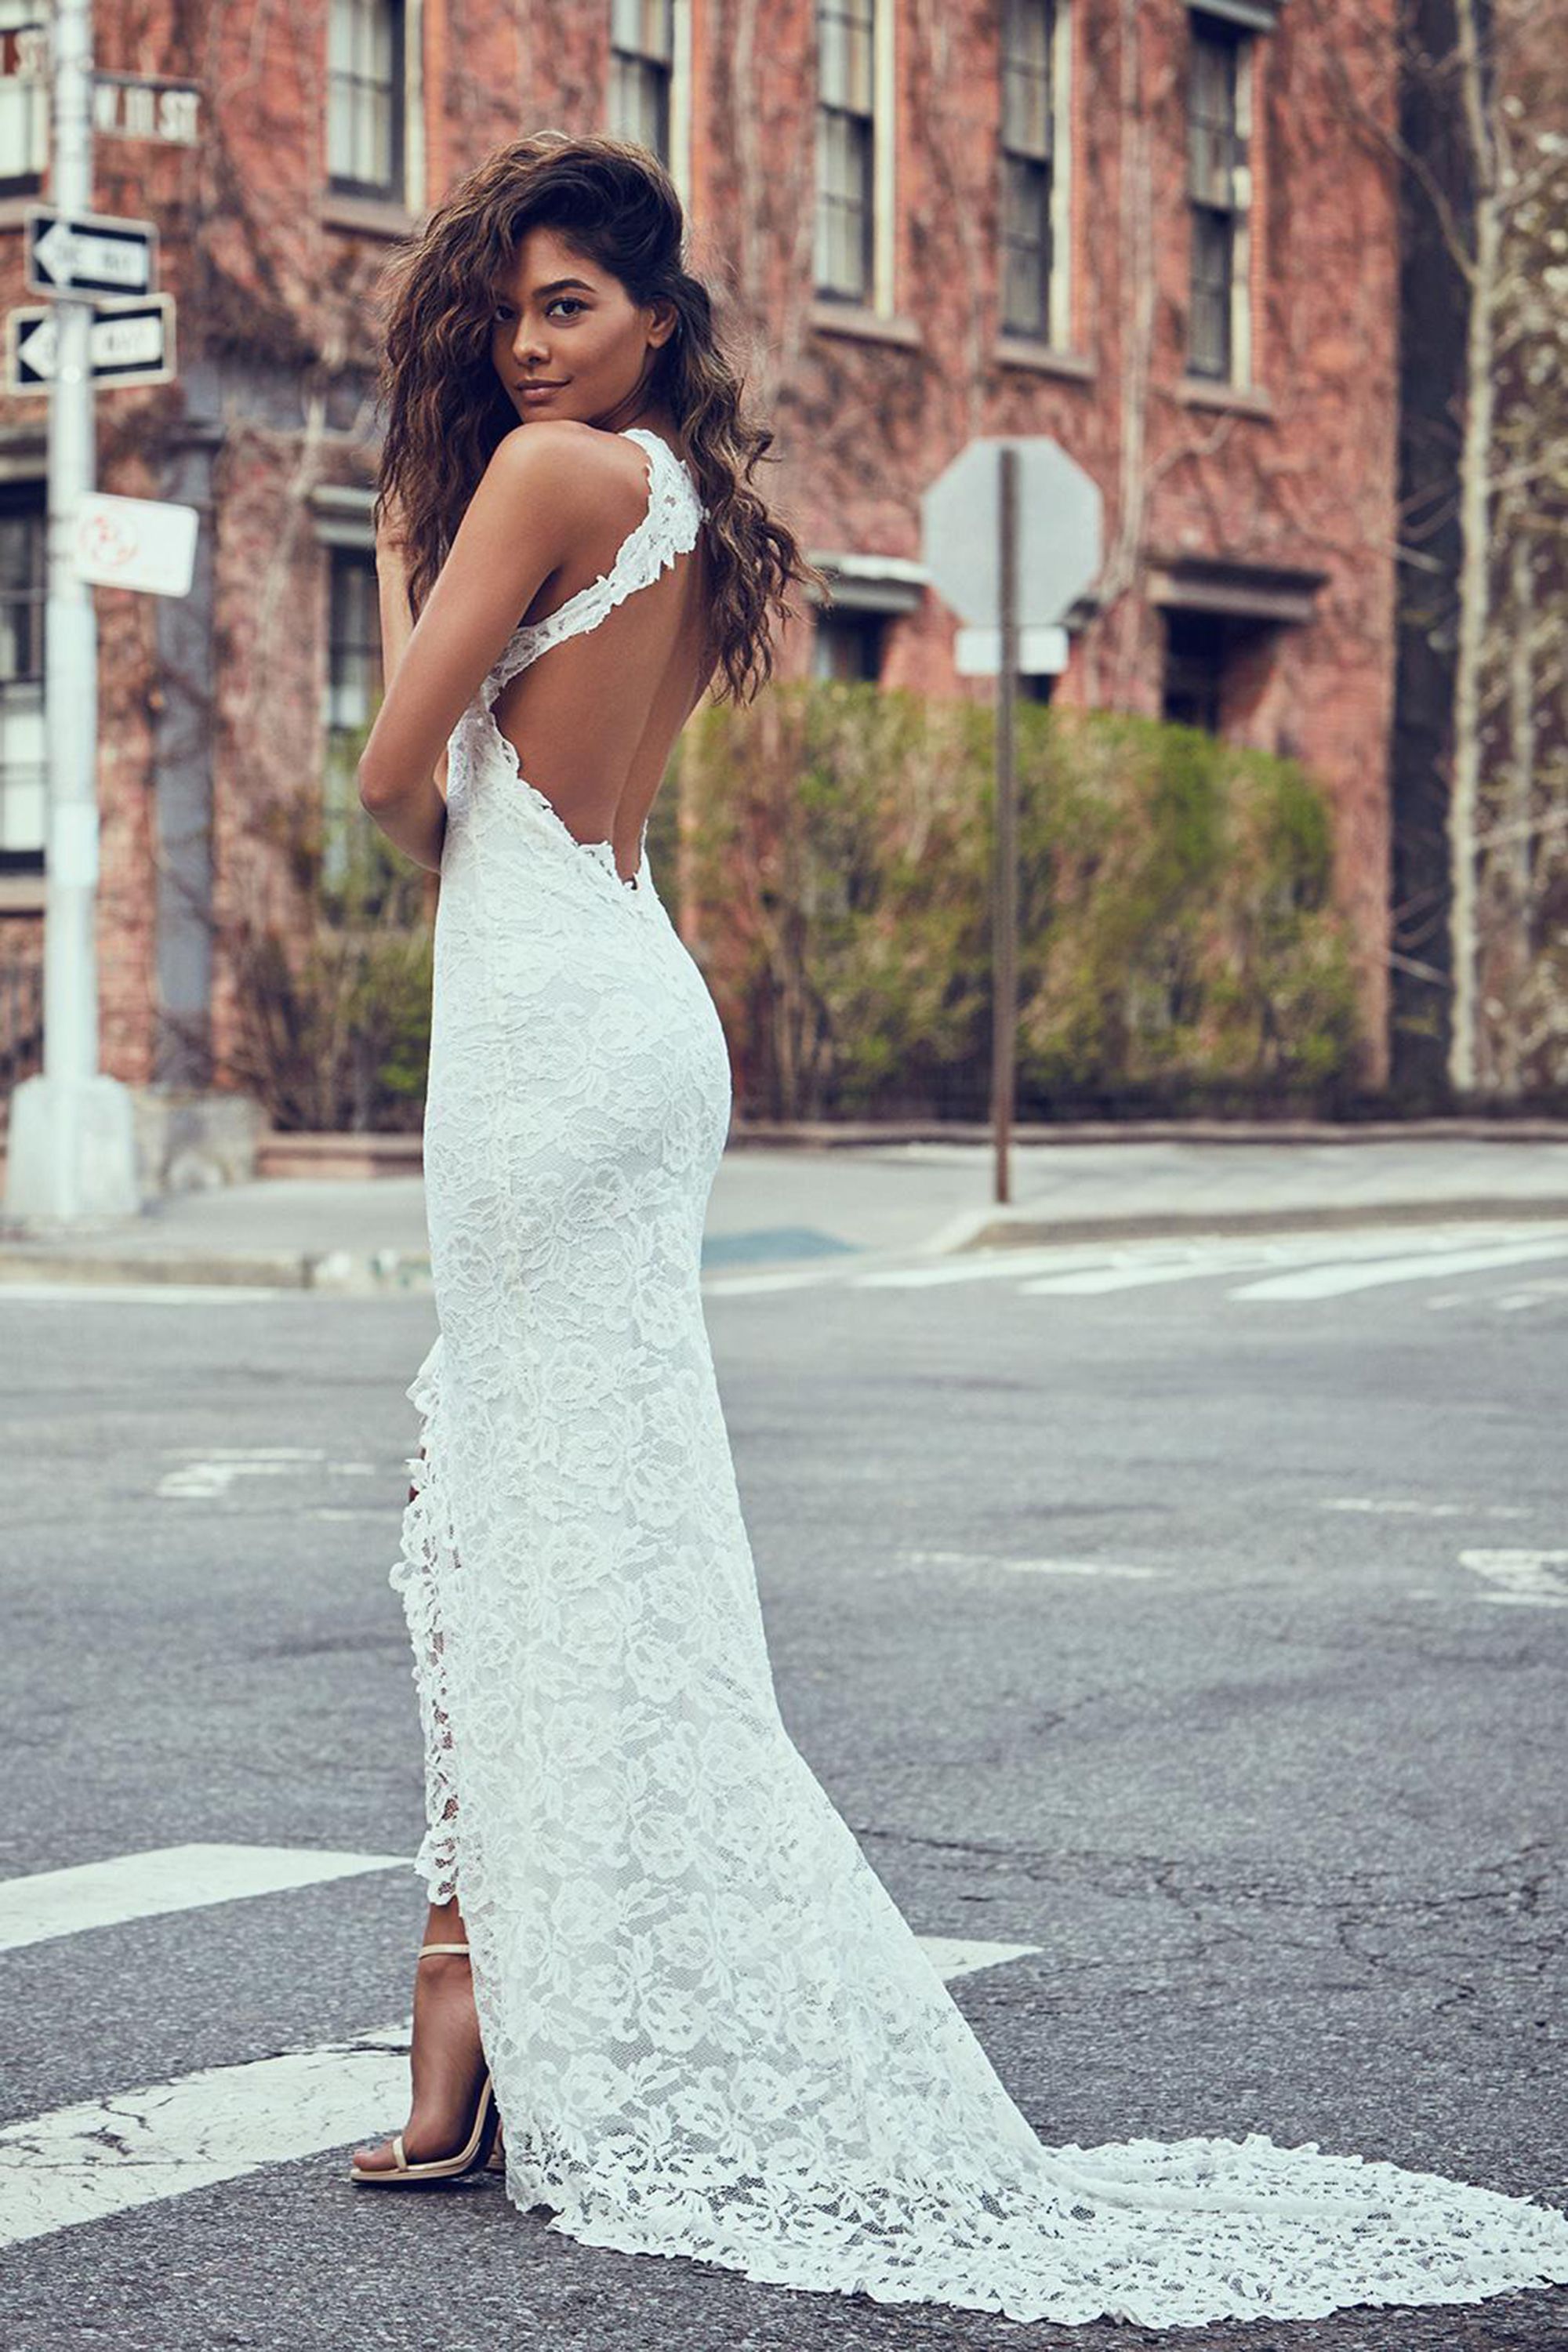 The naked wedding dress is officially a trend